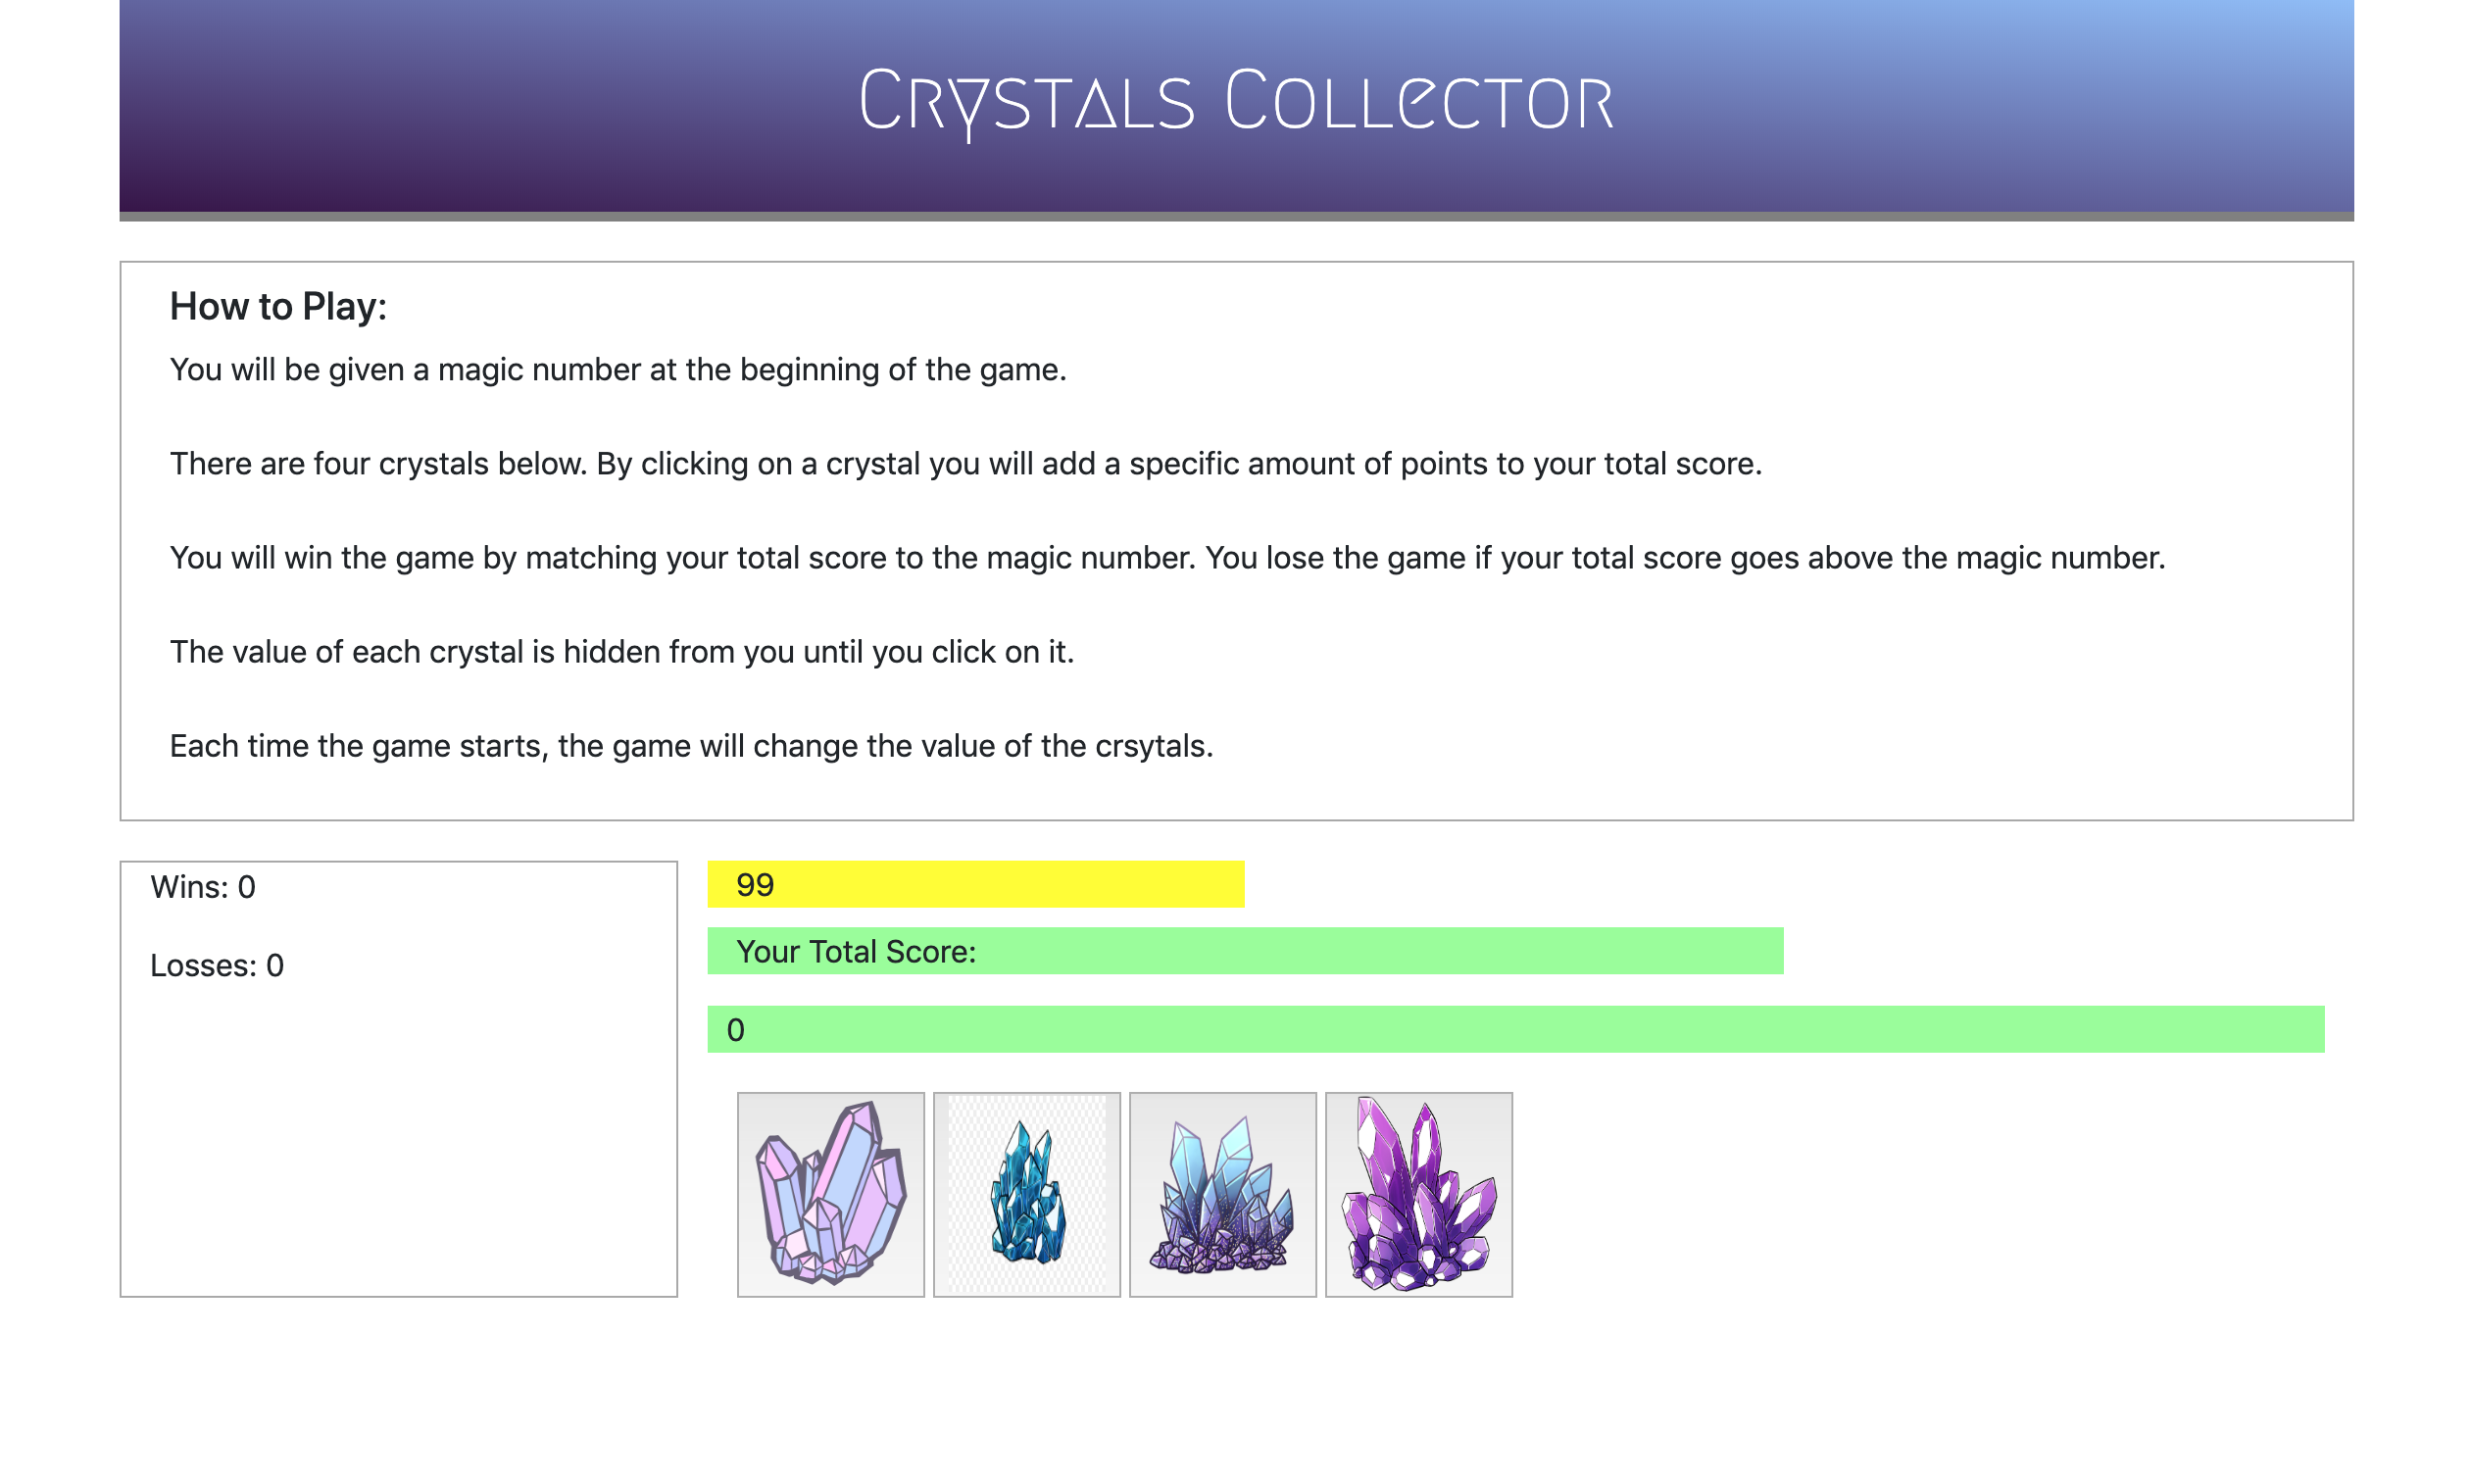 Crystal Collector